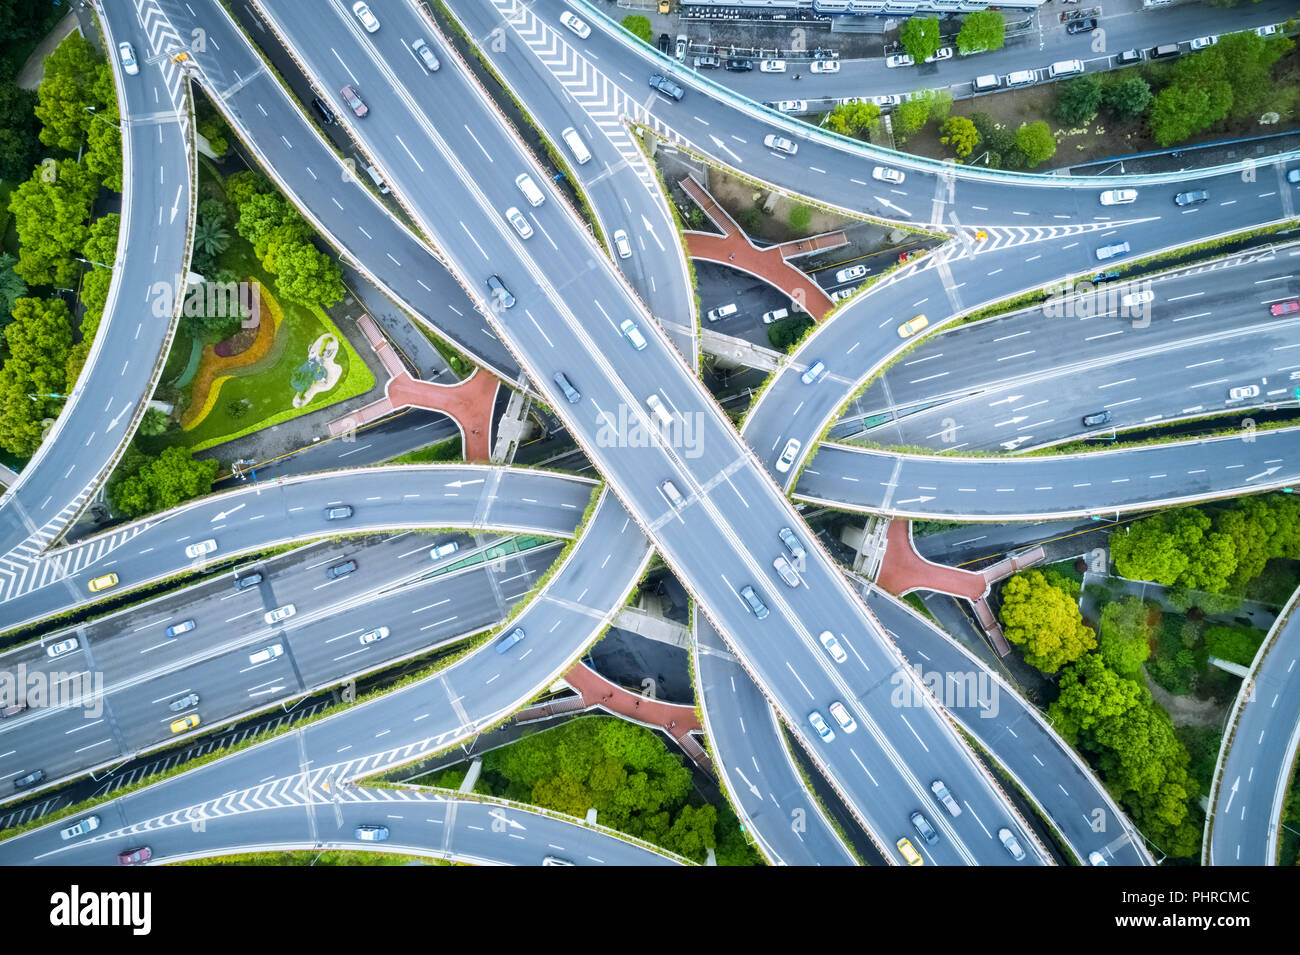 aerial view of elevated road junction Stock Photo